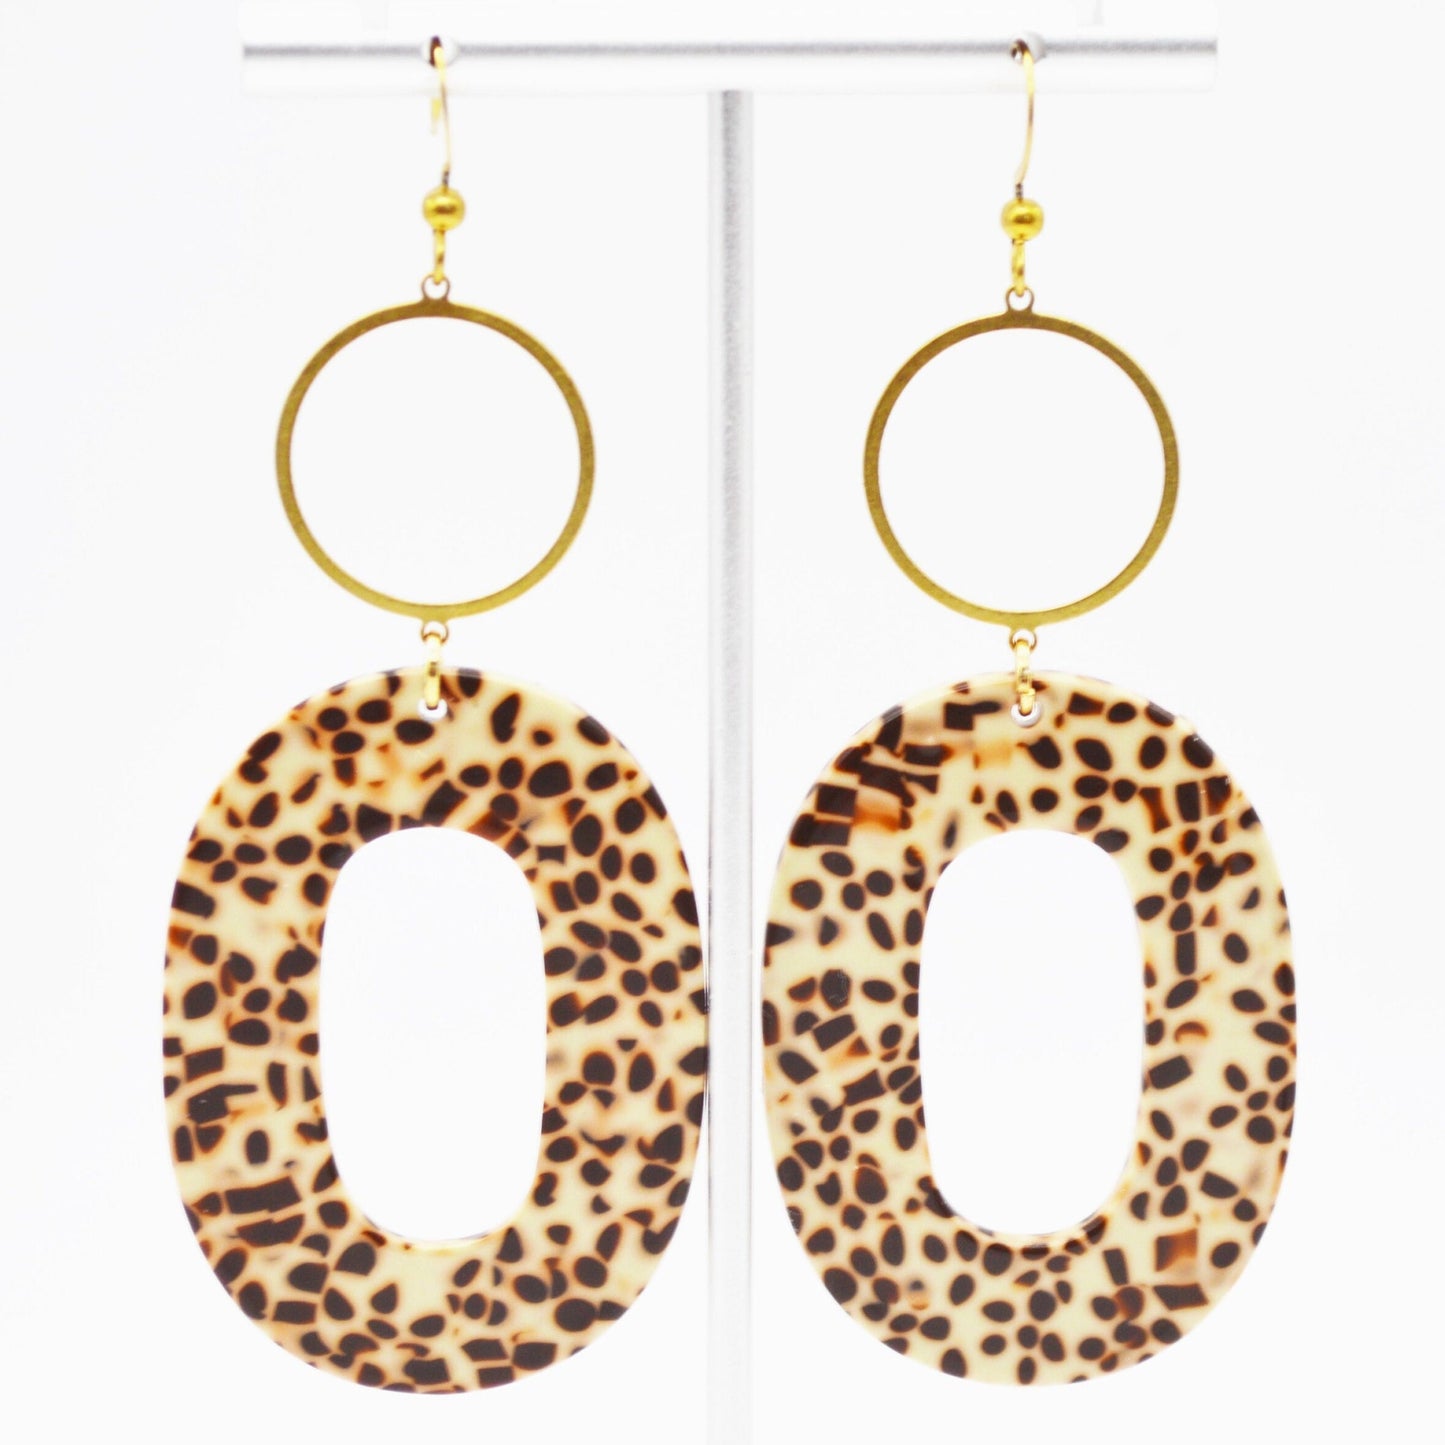 Handmade Lightweight Brown and Beige Spotted Oval Tortoiseshell Earrings with Gold Hoop Option